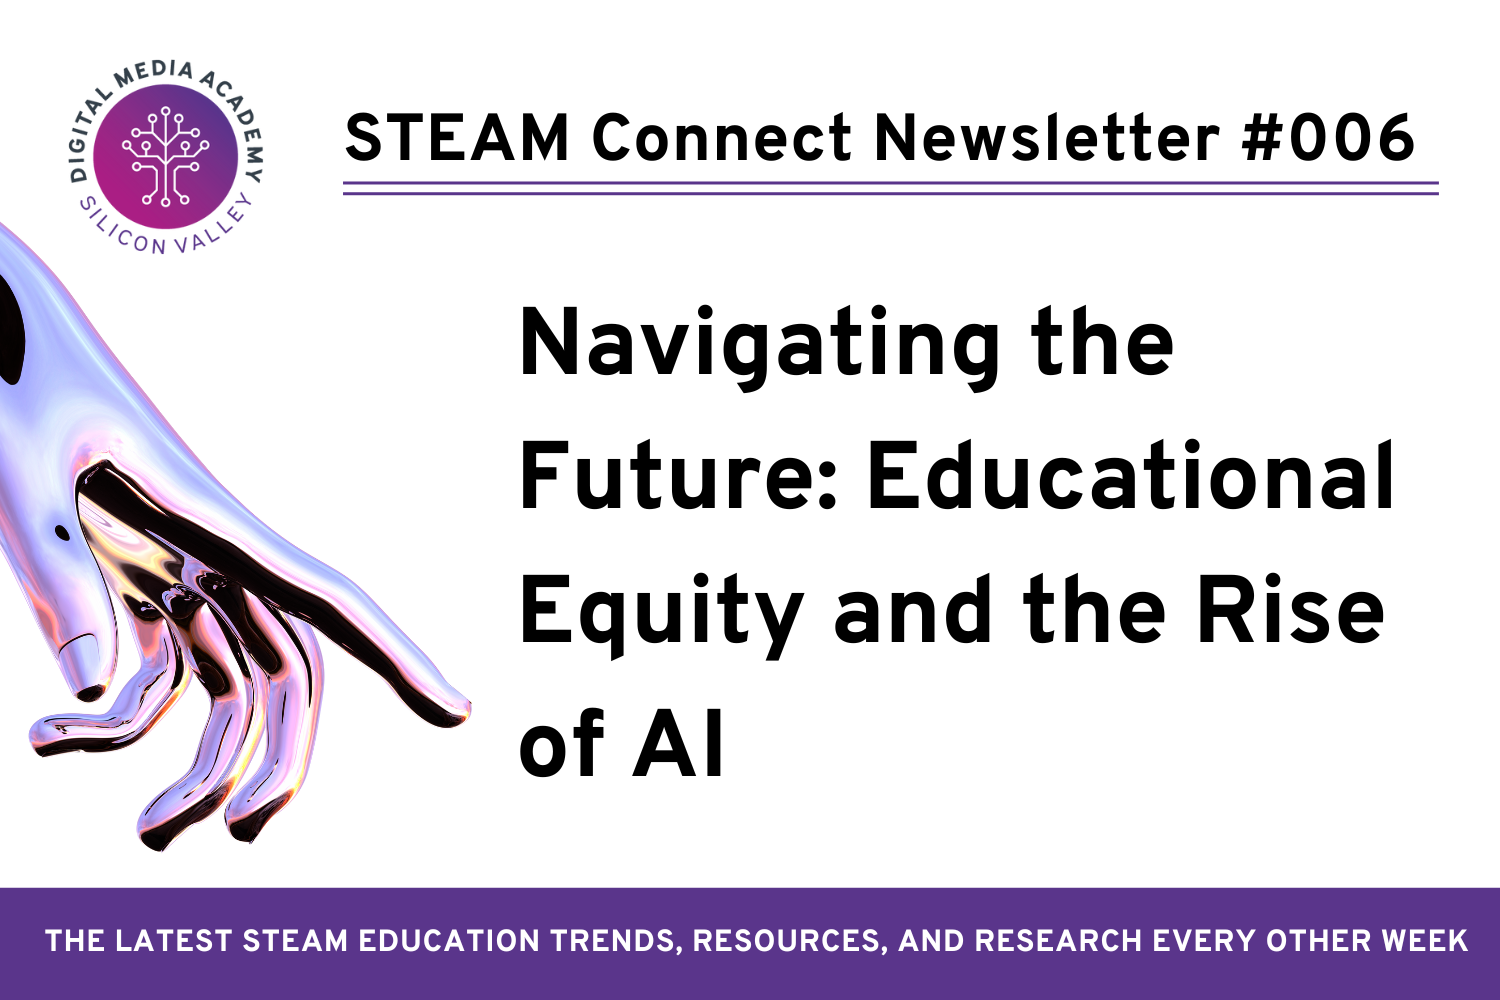 Navigating the Future: Educational Equity and the Rise of AI